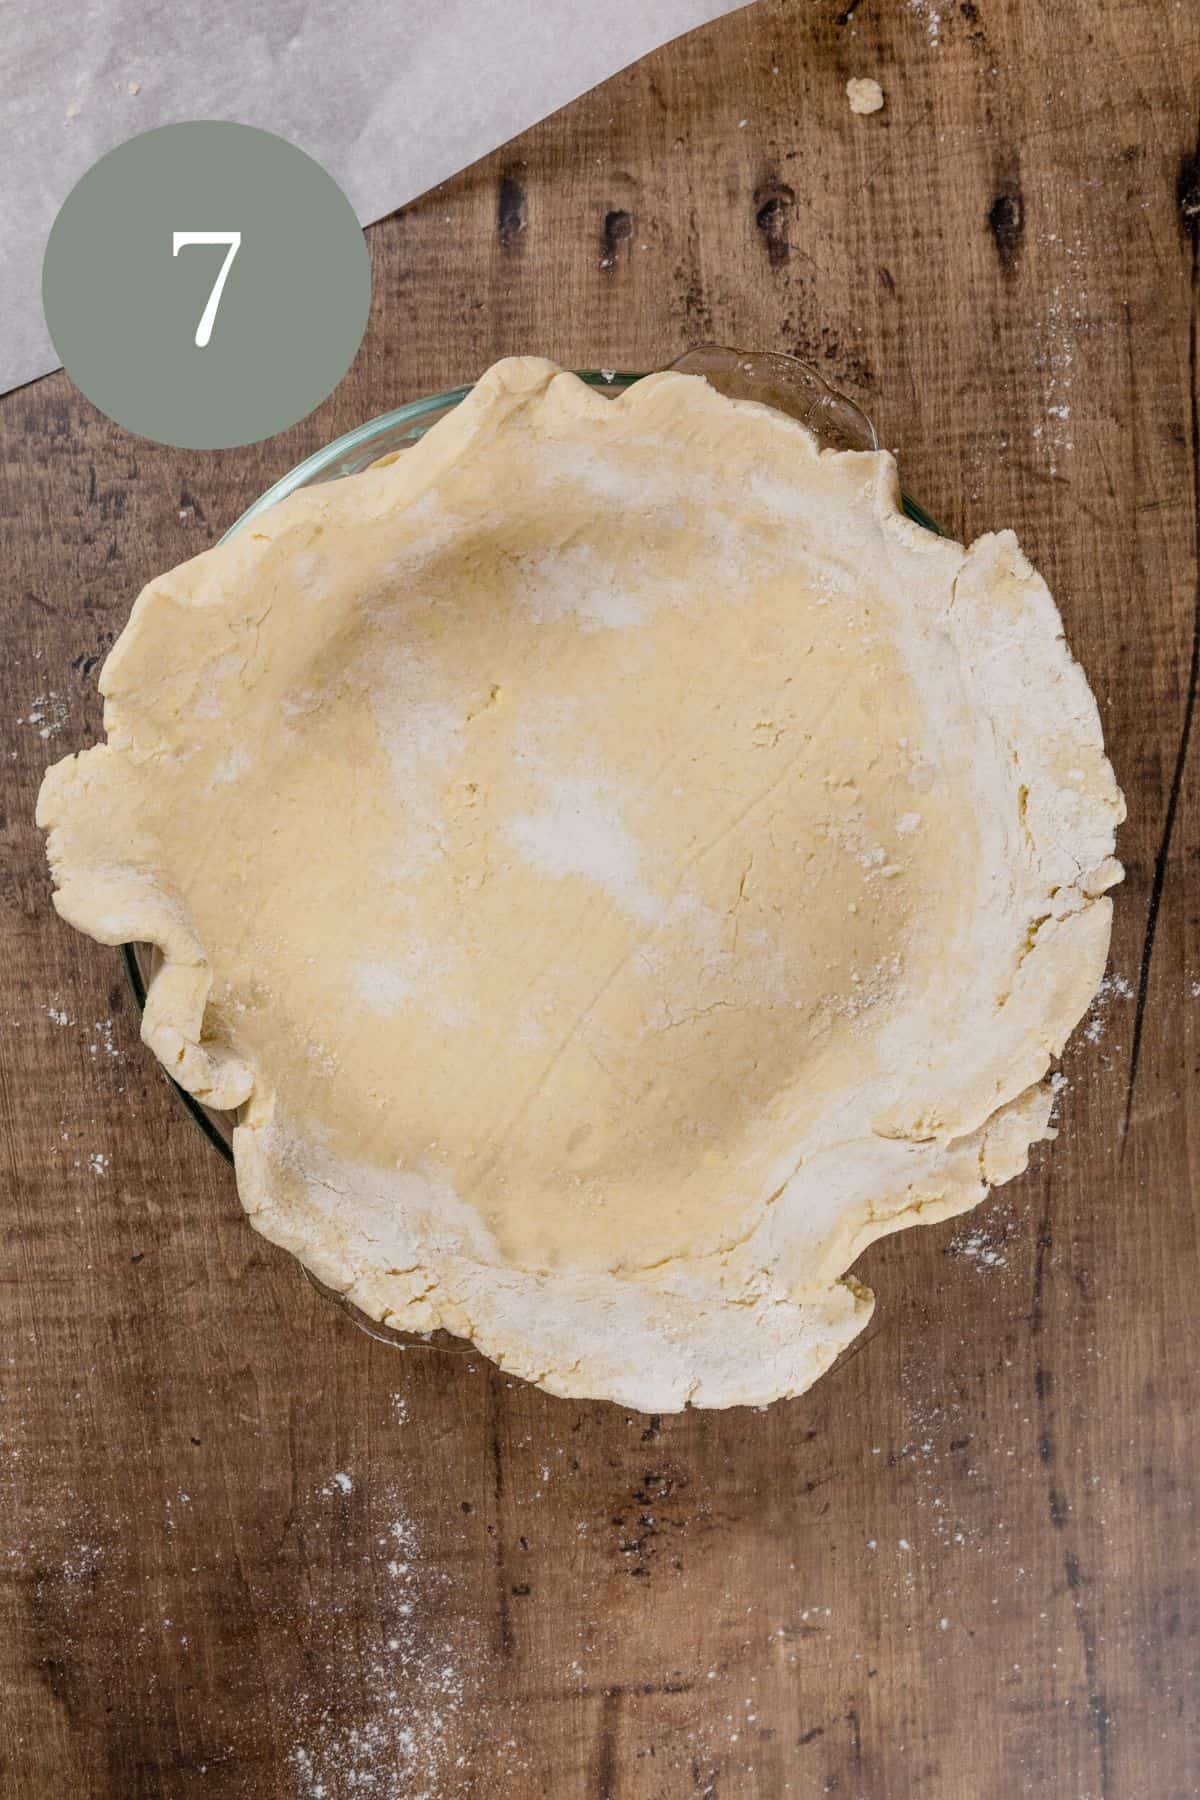 a gluten free pie crust without trimmed edges on a wood tabletop. parchment paper and extra flour are seen on the edges of the photo. the number 7 is in the top left corner.